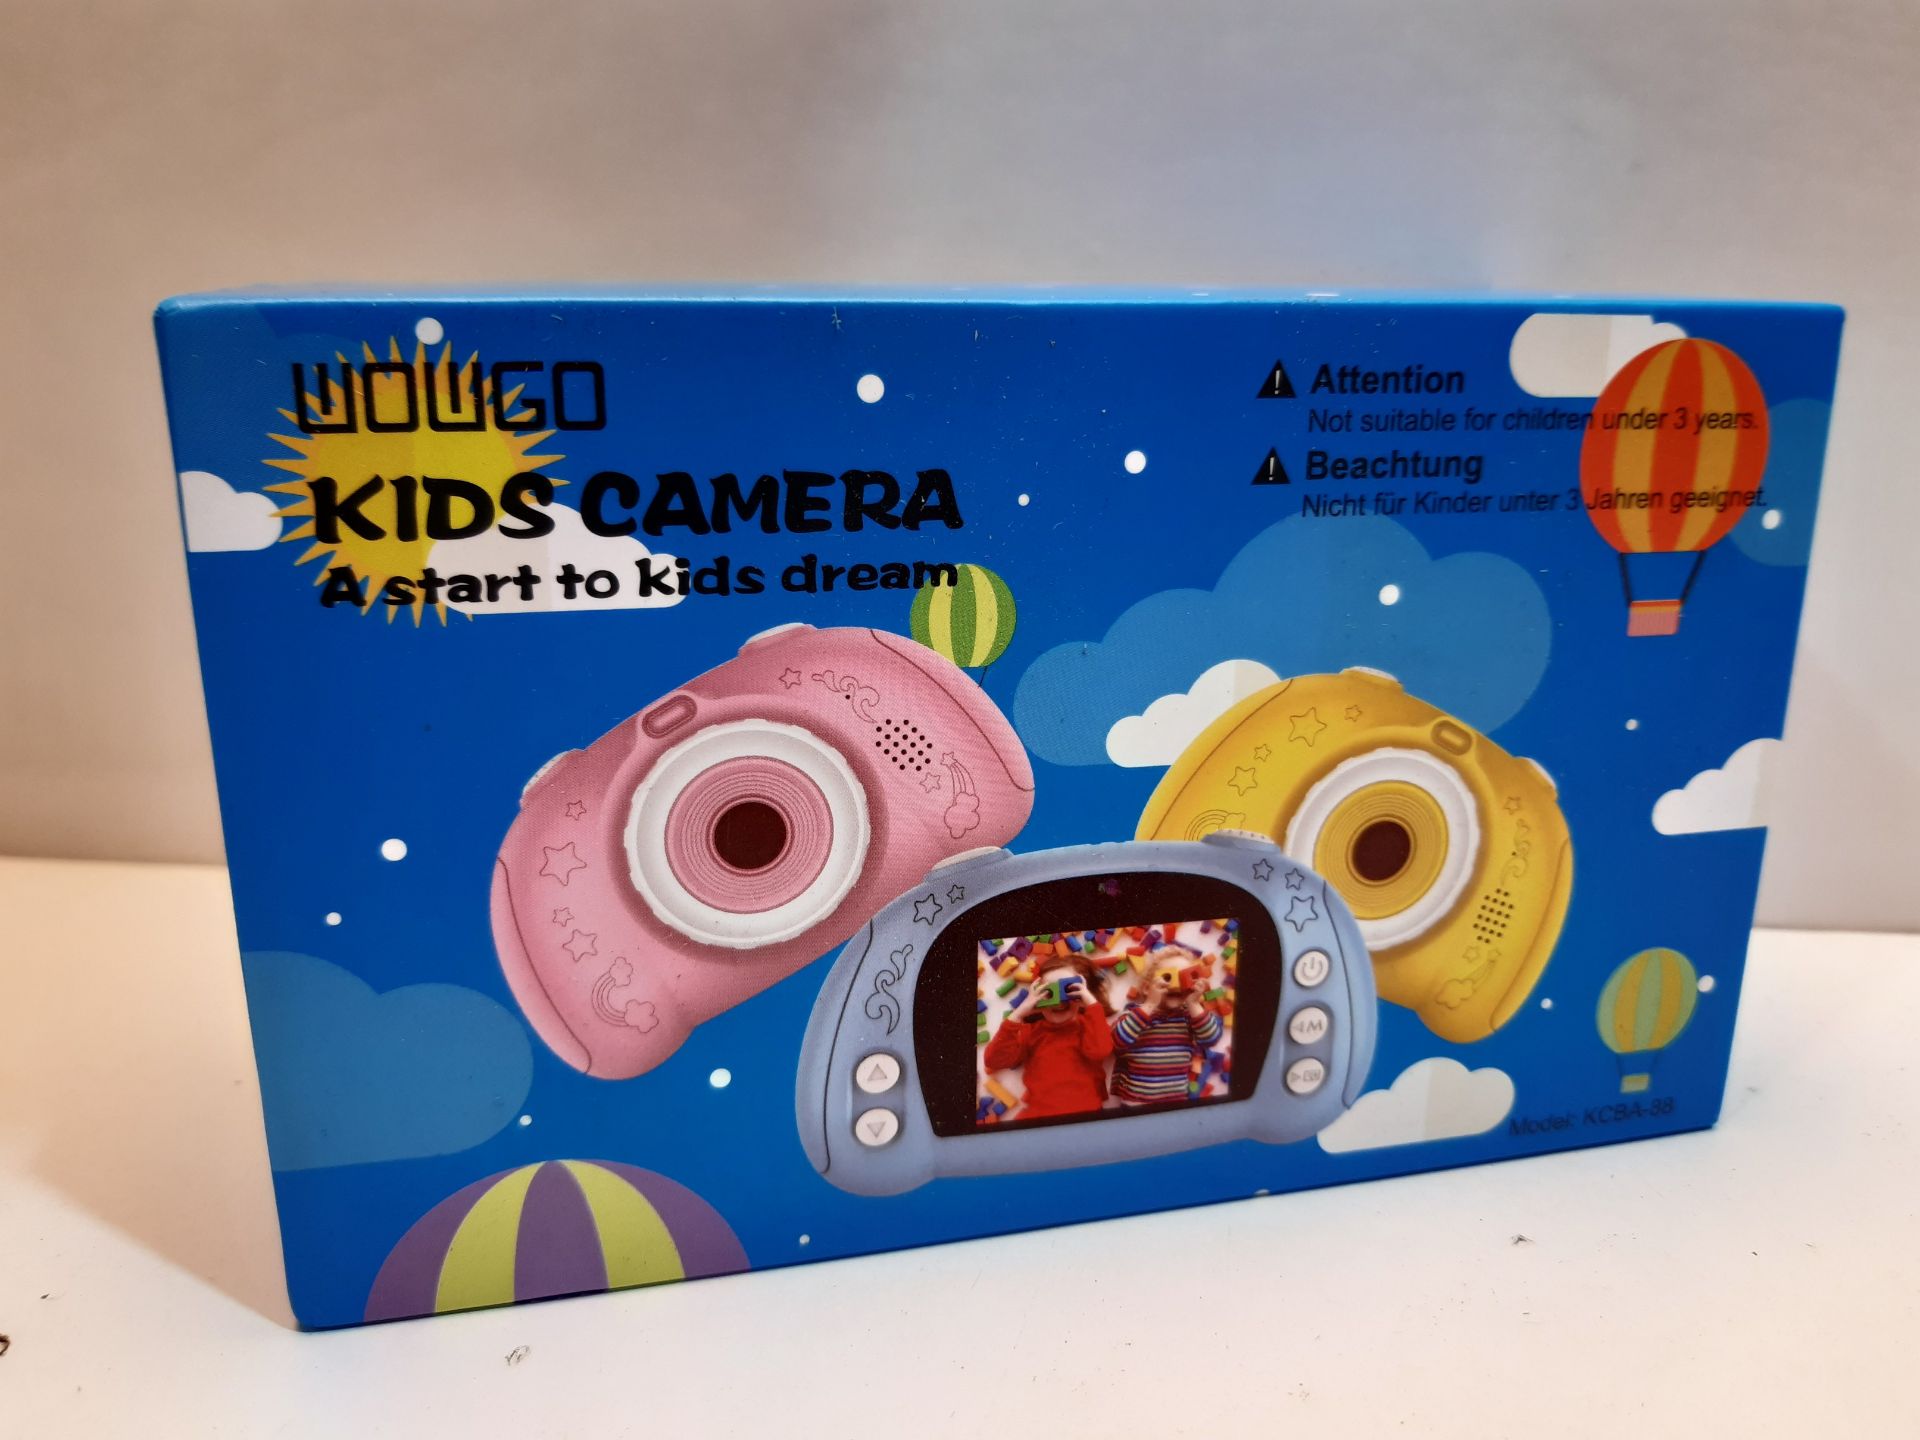 RRP £33.98 WOWGO Kids Camera Toy Toddler Digital Camera Video - Image 2 of 2